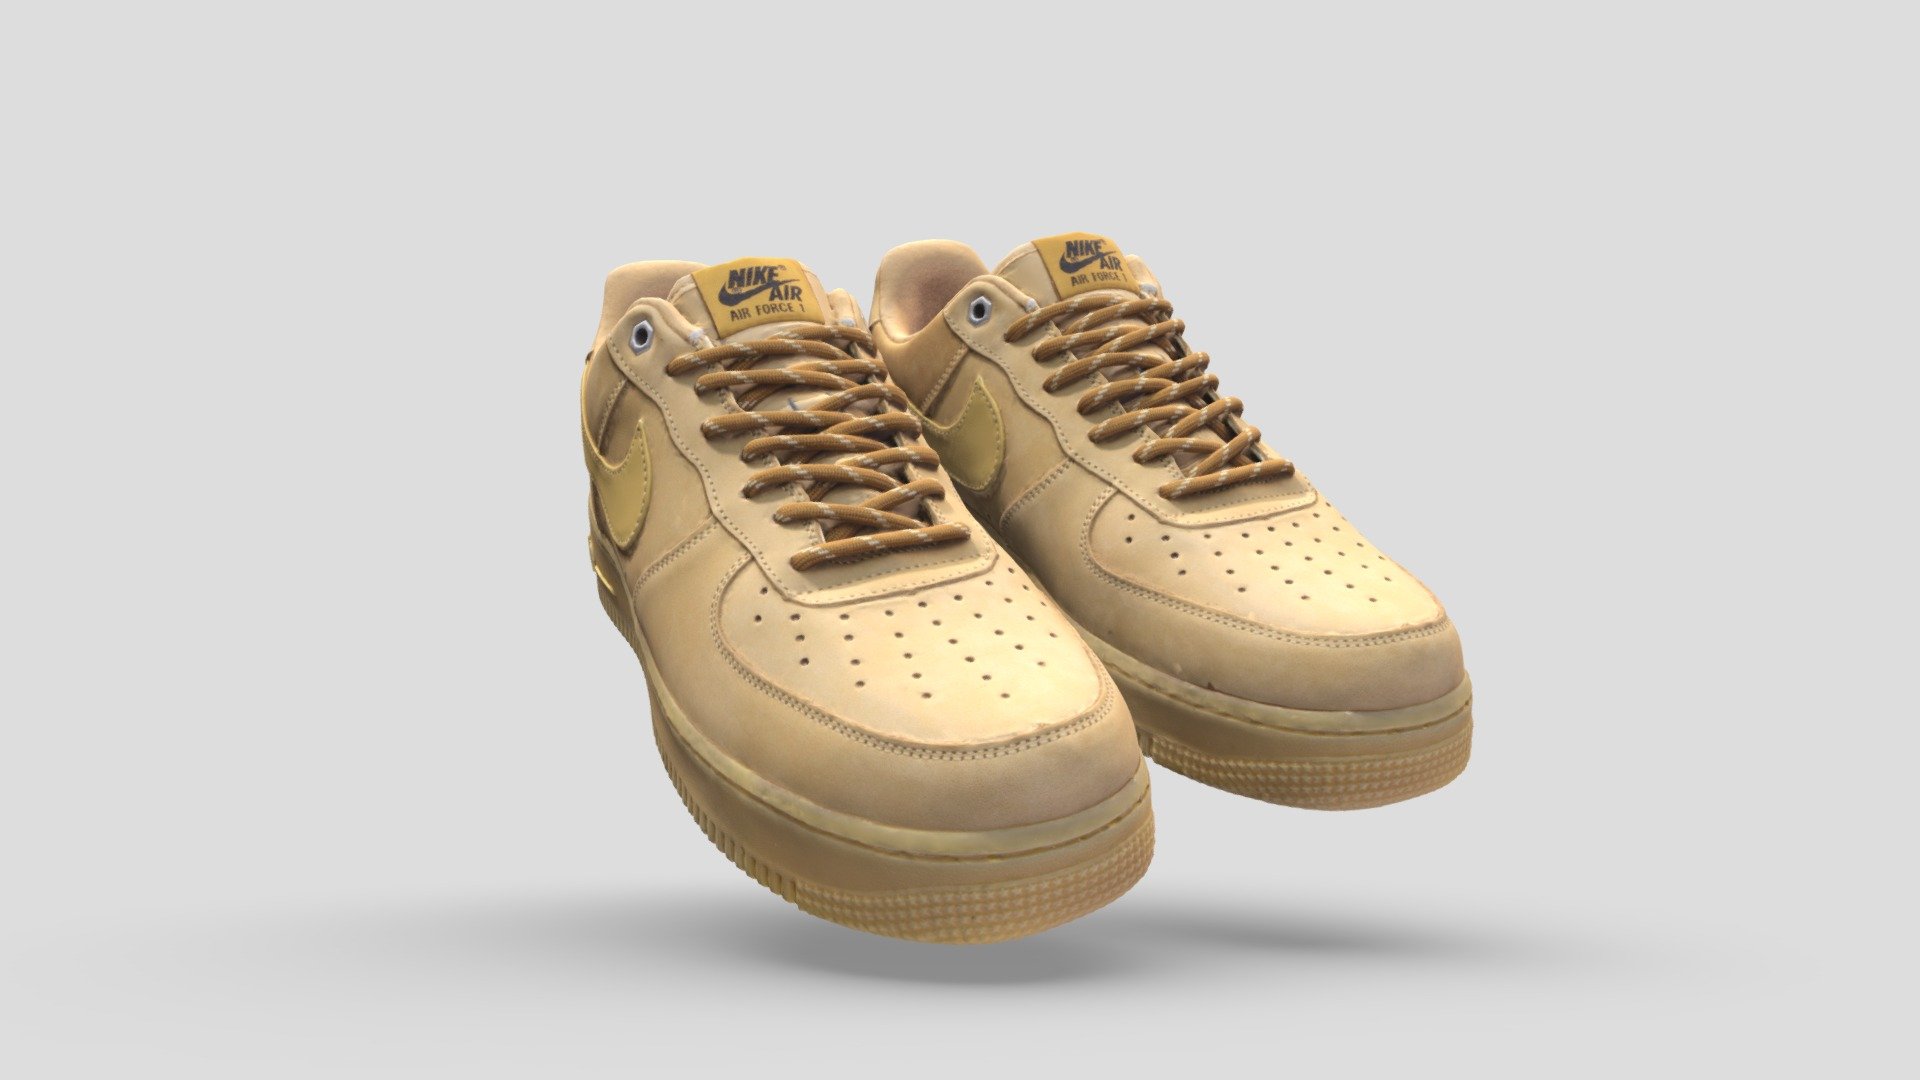 Highly detailed, photorealistic 3d scanned model Nike Air Force 1 Brown
The model is cleaned up and retopologized and ready to use! 
The set includes a pair of sneakers.

&mdash;What's included&mdash; 
4k texture maps 
Each sneaker has 200k polygons 
All the models come in FBX/OBJ File formats.

*Please note that this is a photo-scanned model, and it may not be a 100% perfect model 3d model